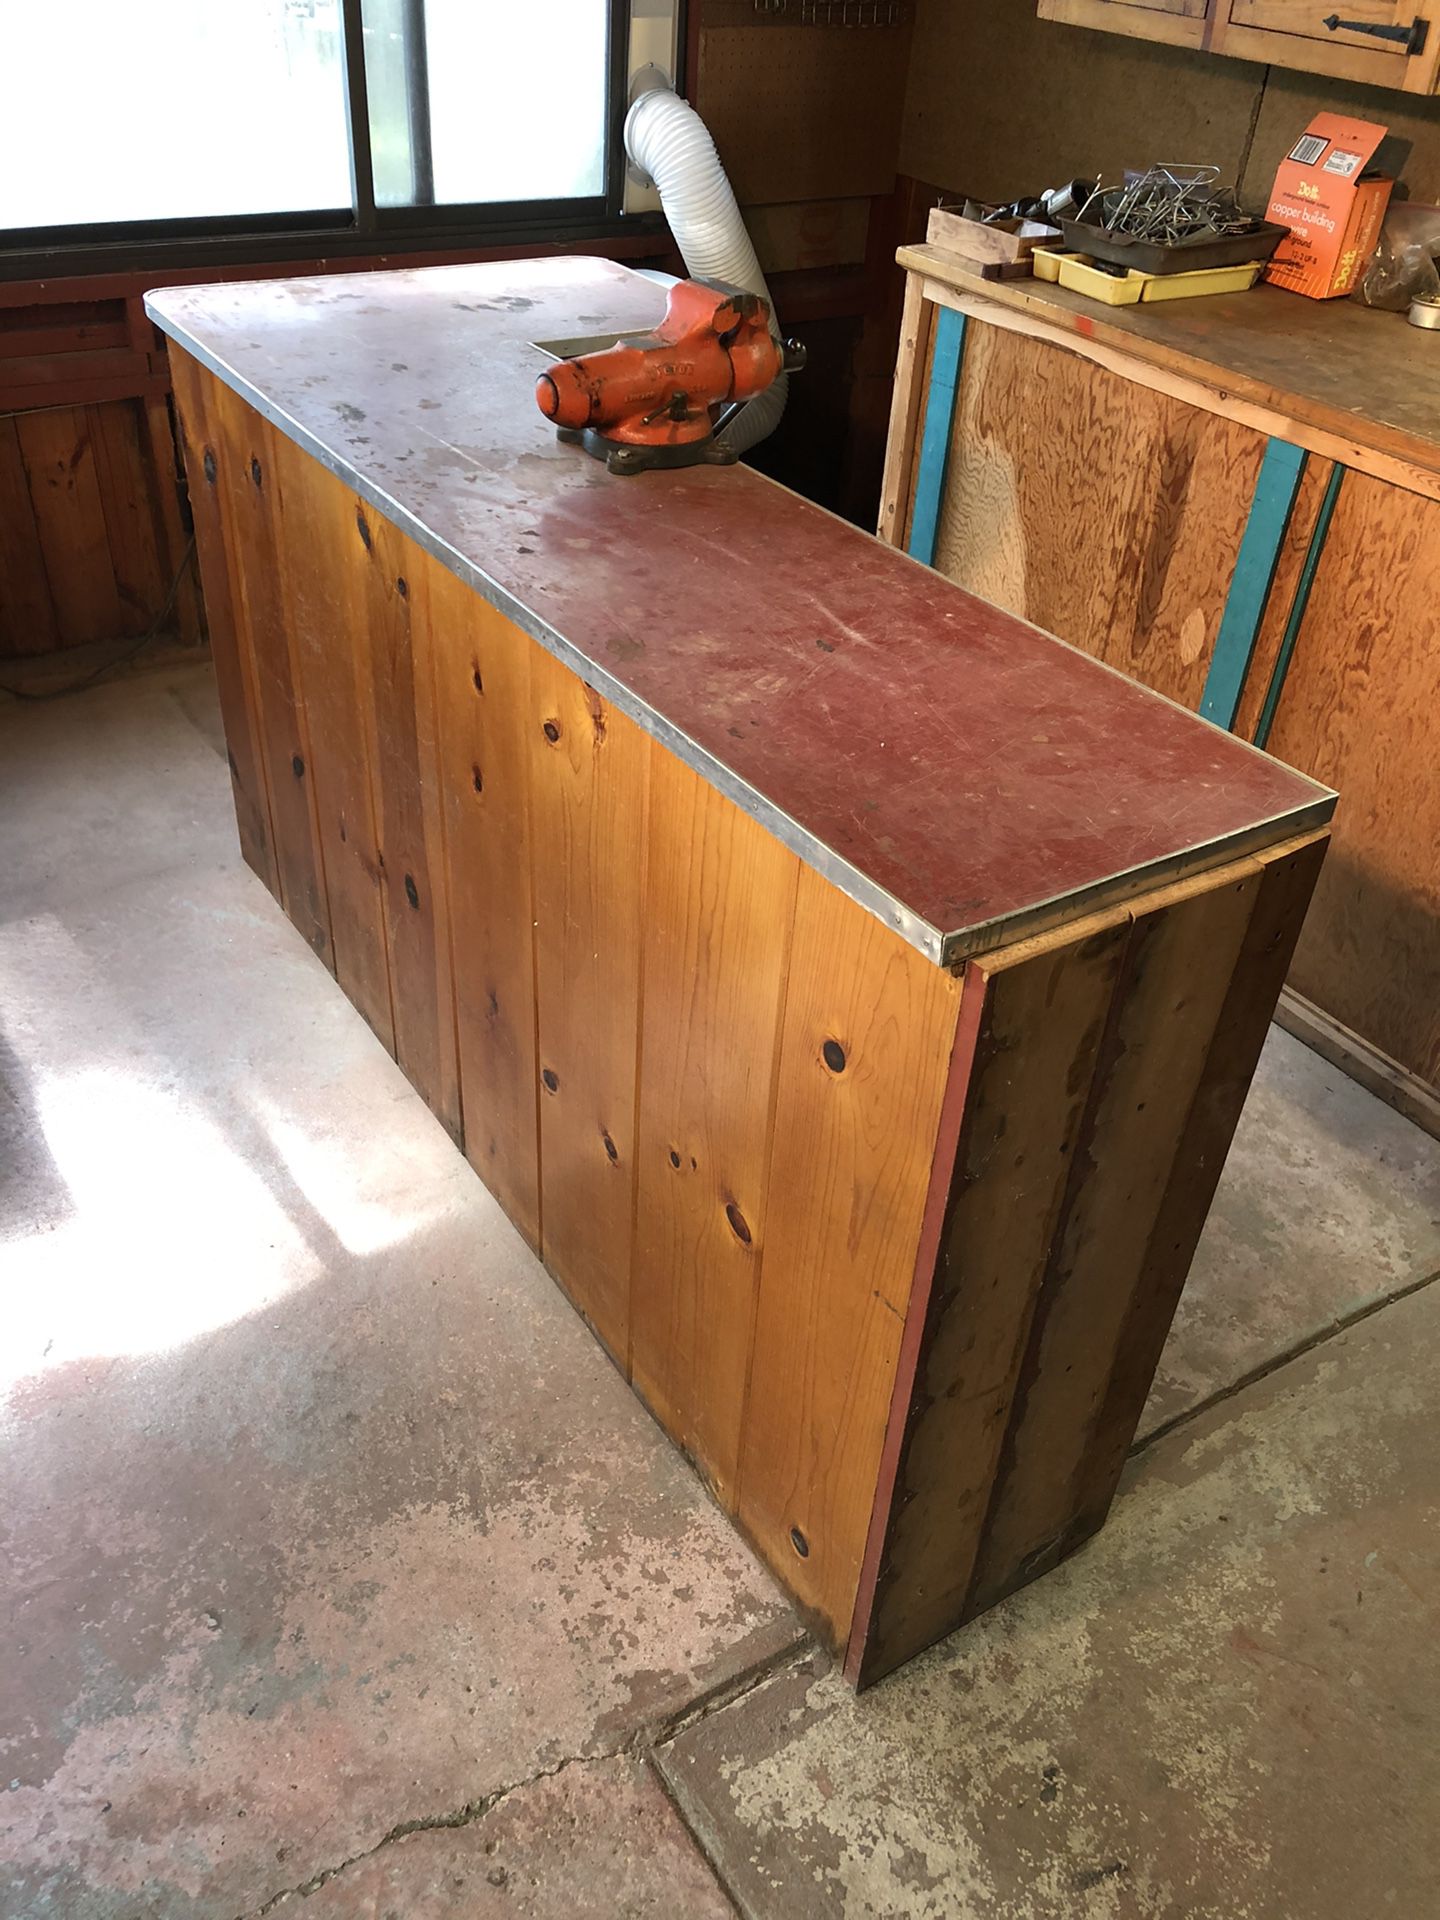 Wooden Storage with Formica Countertop for Workshop or Garage